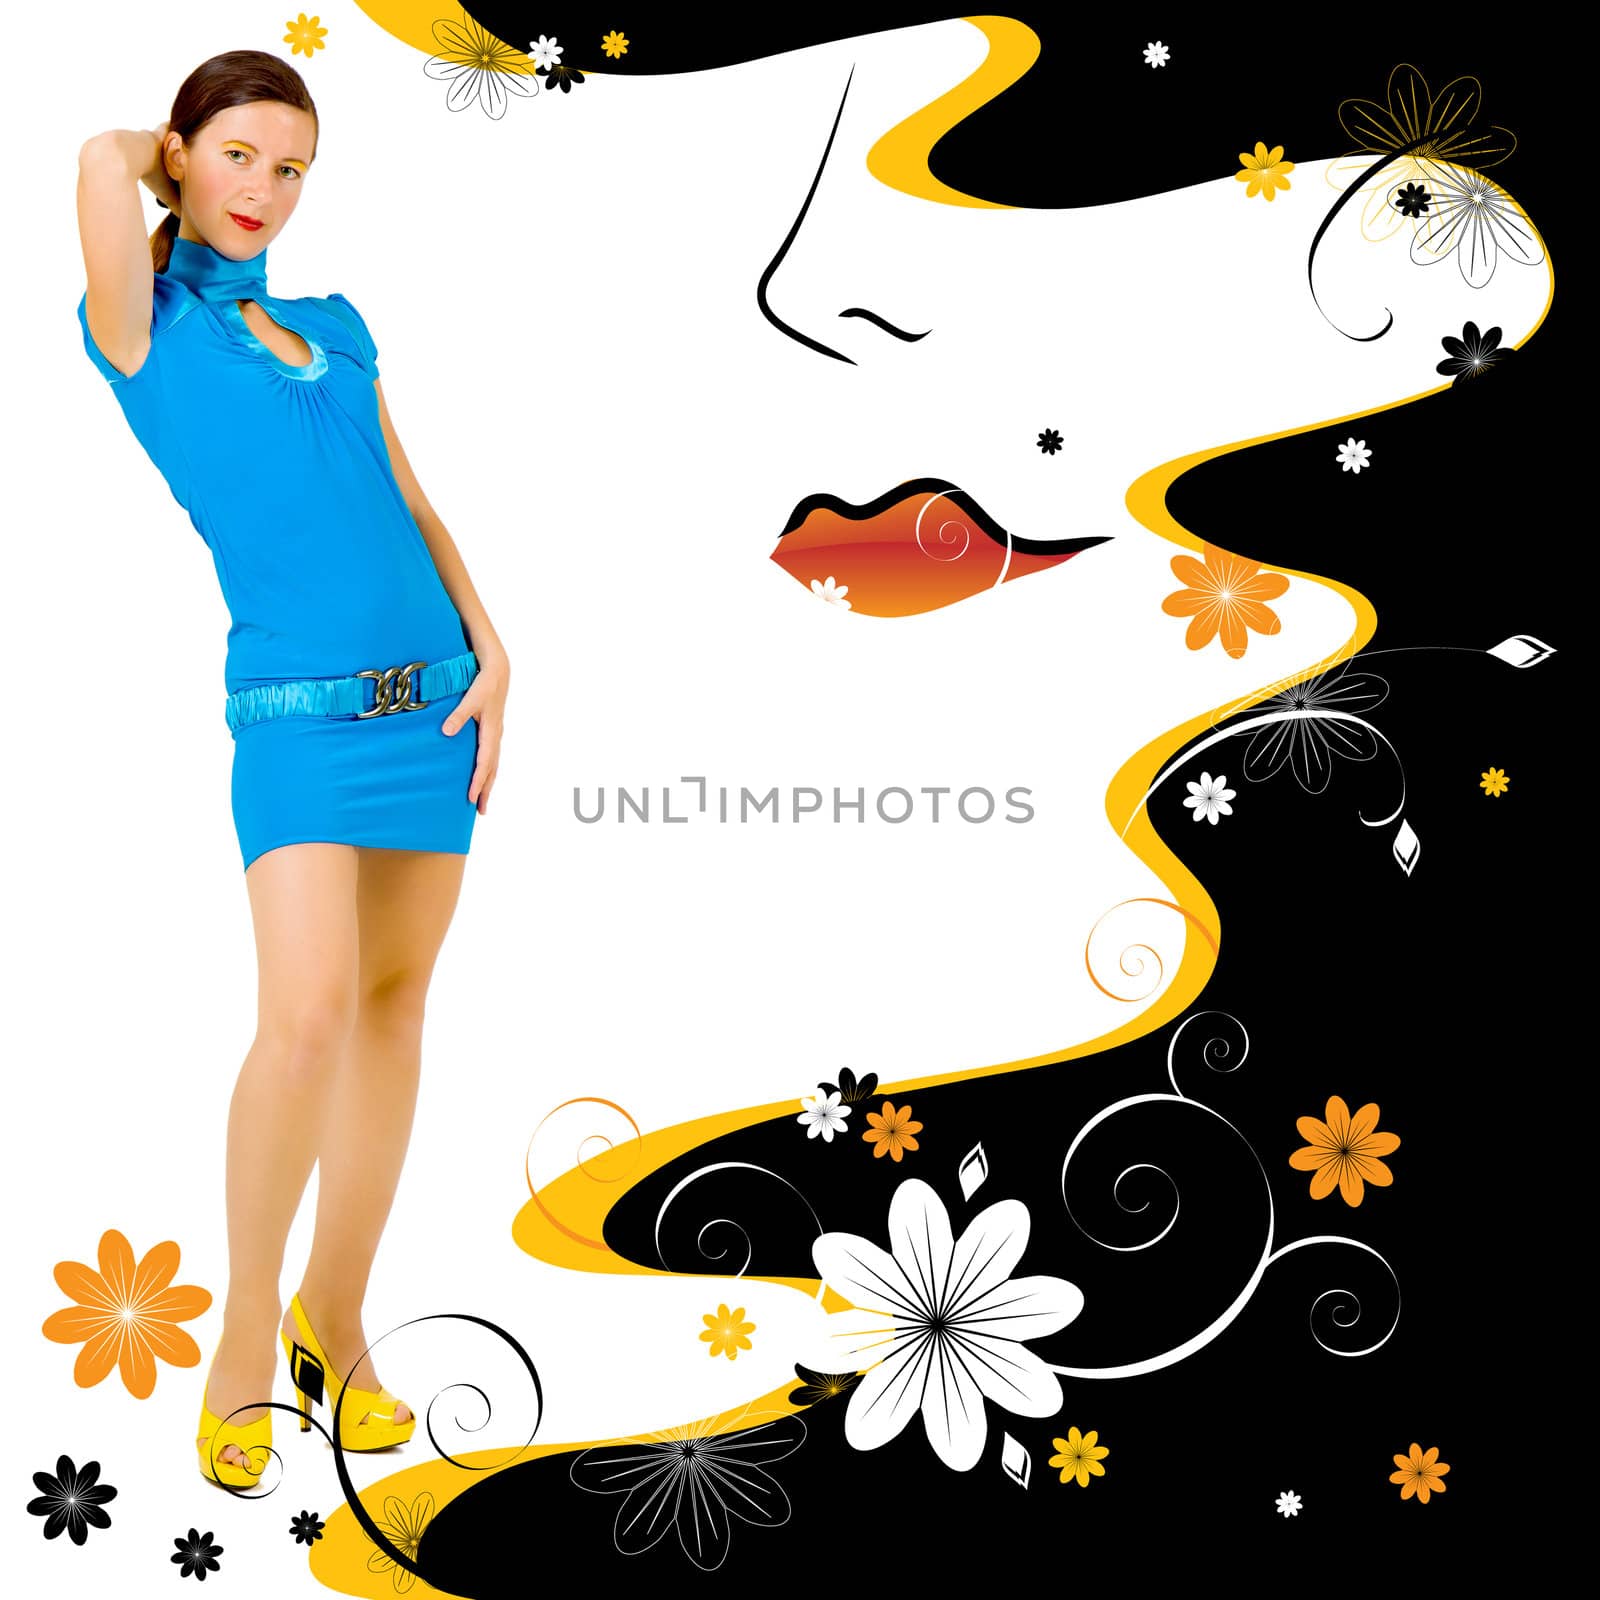 Fashion girl with an illustrated background by pzRomashka